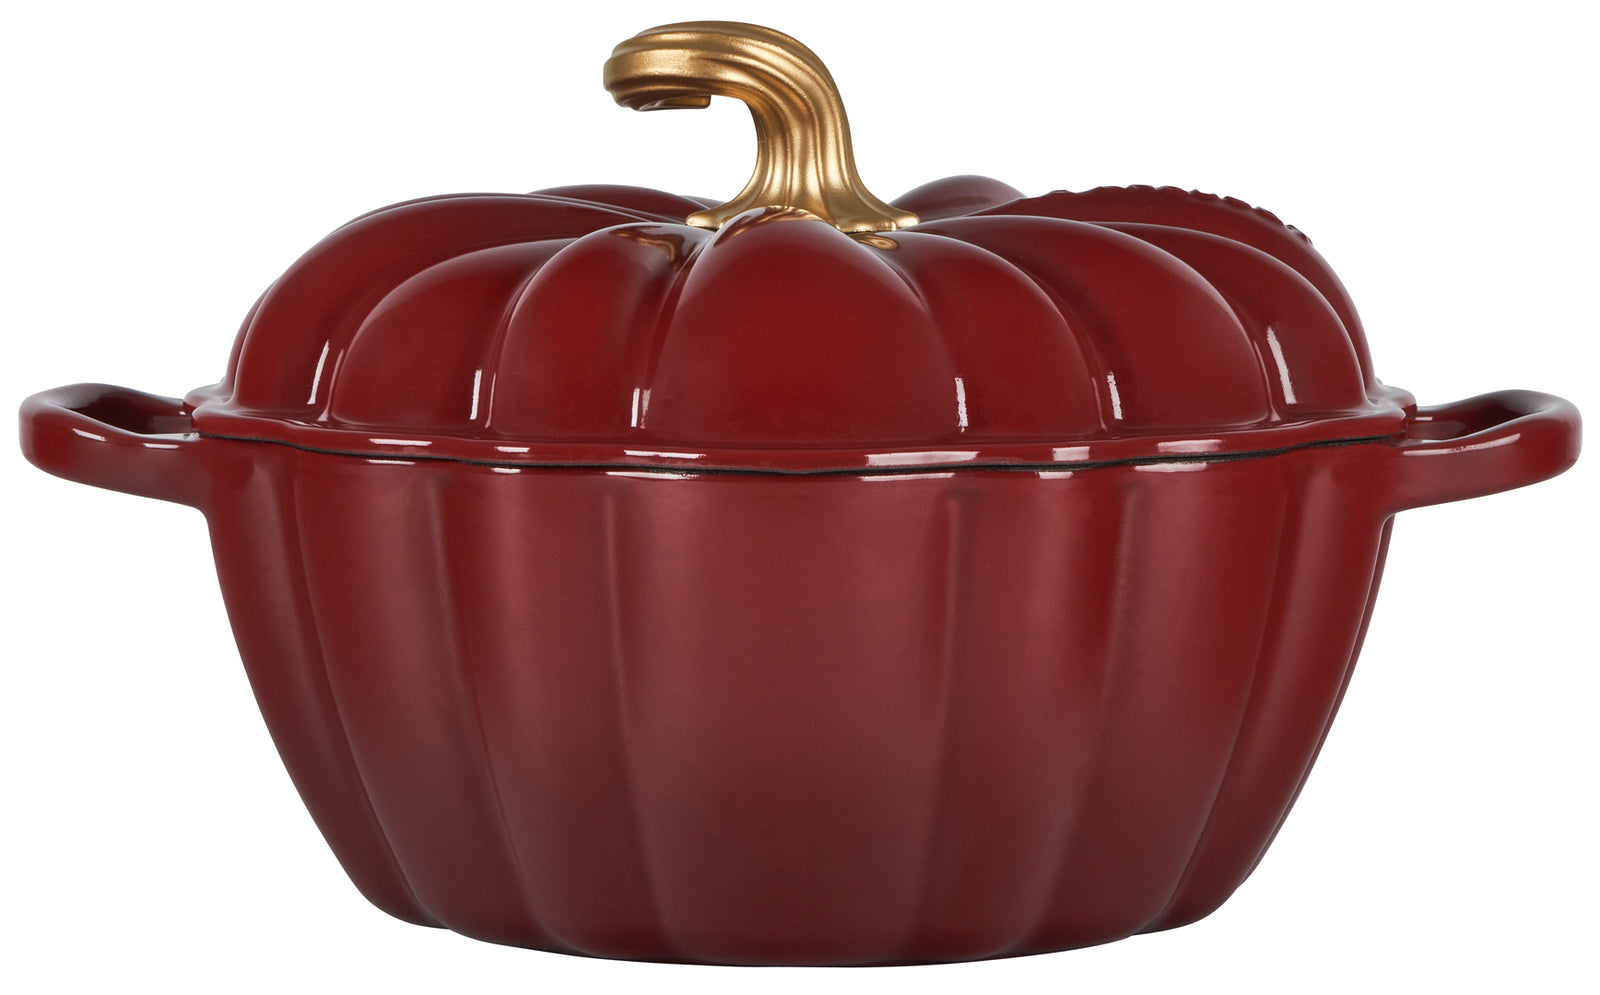 Le Creuset Heart shallow cocotte cast iron 1qt French oven Cherry Red  Cerise